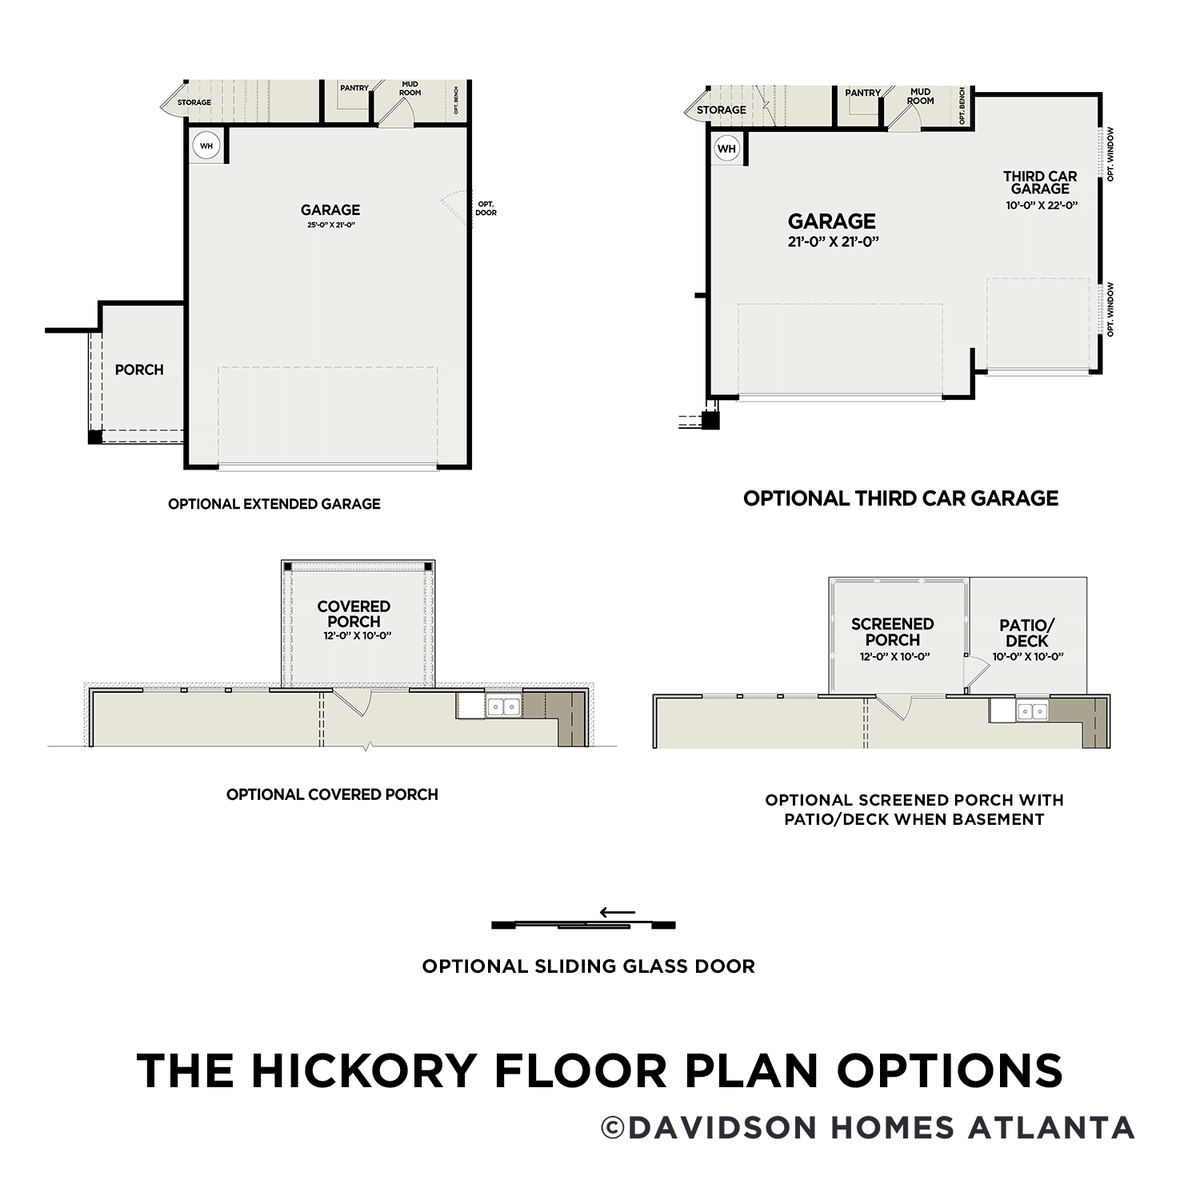 3 - The Hickory B floor plan layout for 93 Laurelwood Lane in Davidson Homes' Riverwood community.